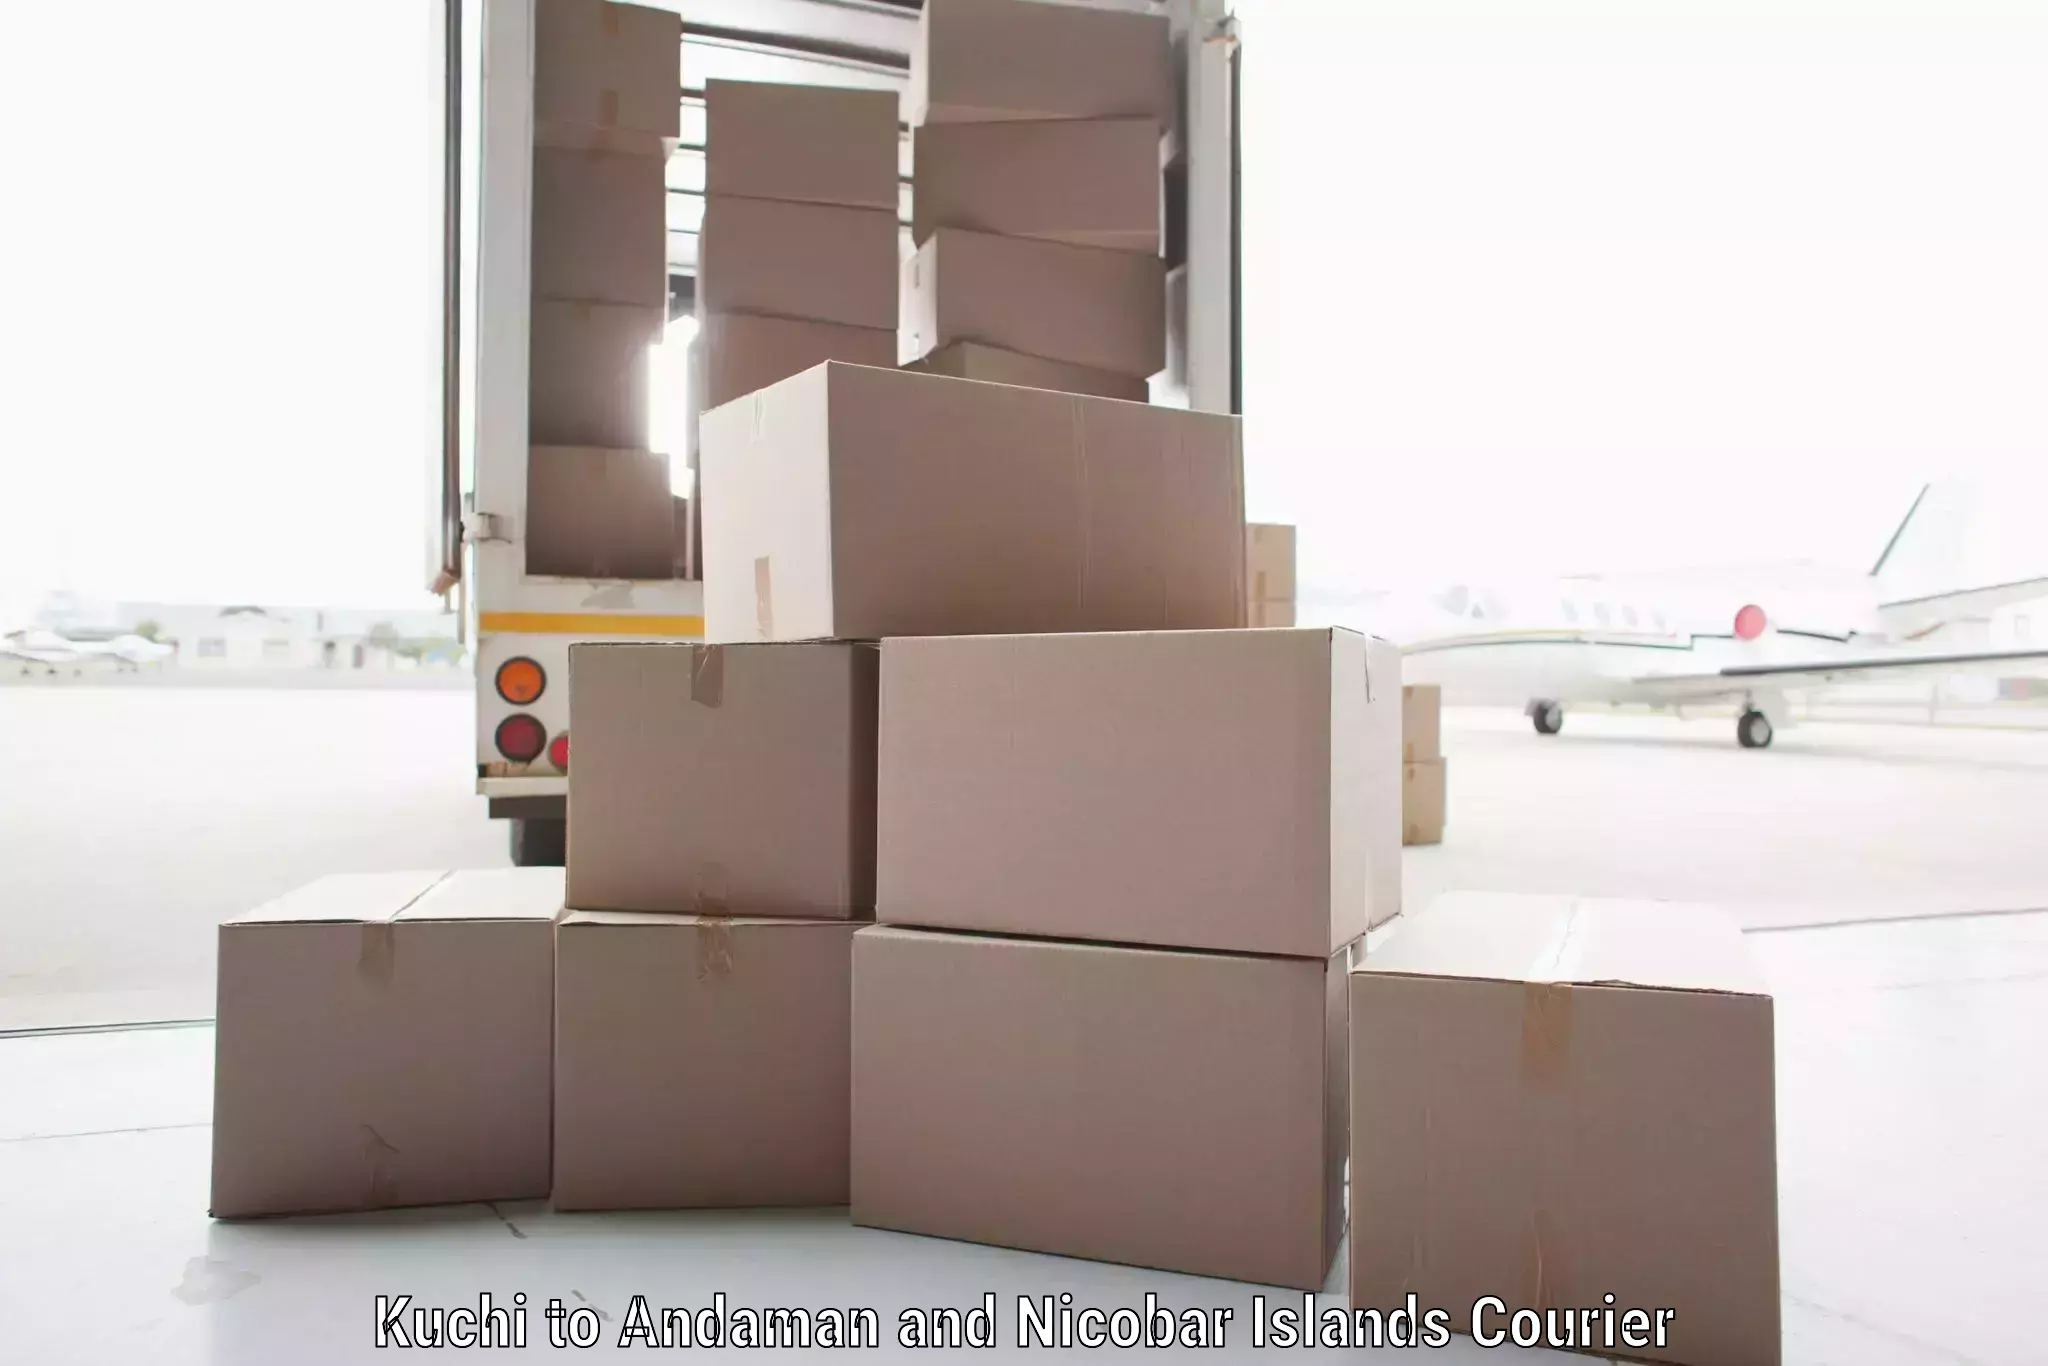 High-capacity parcel service in Kuchi to South Andaman